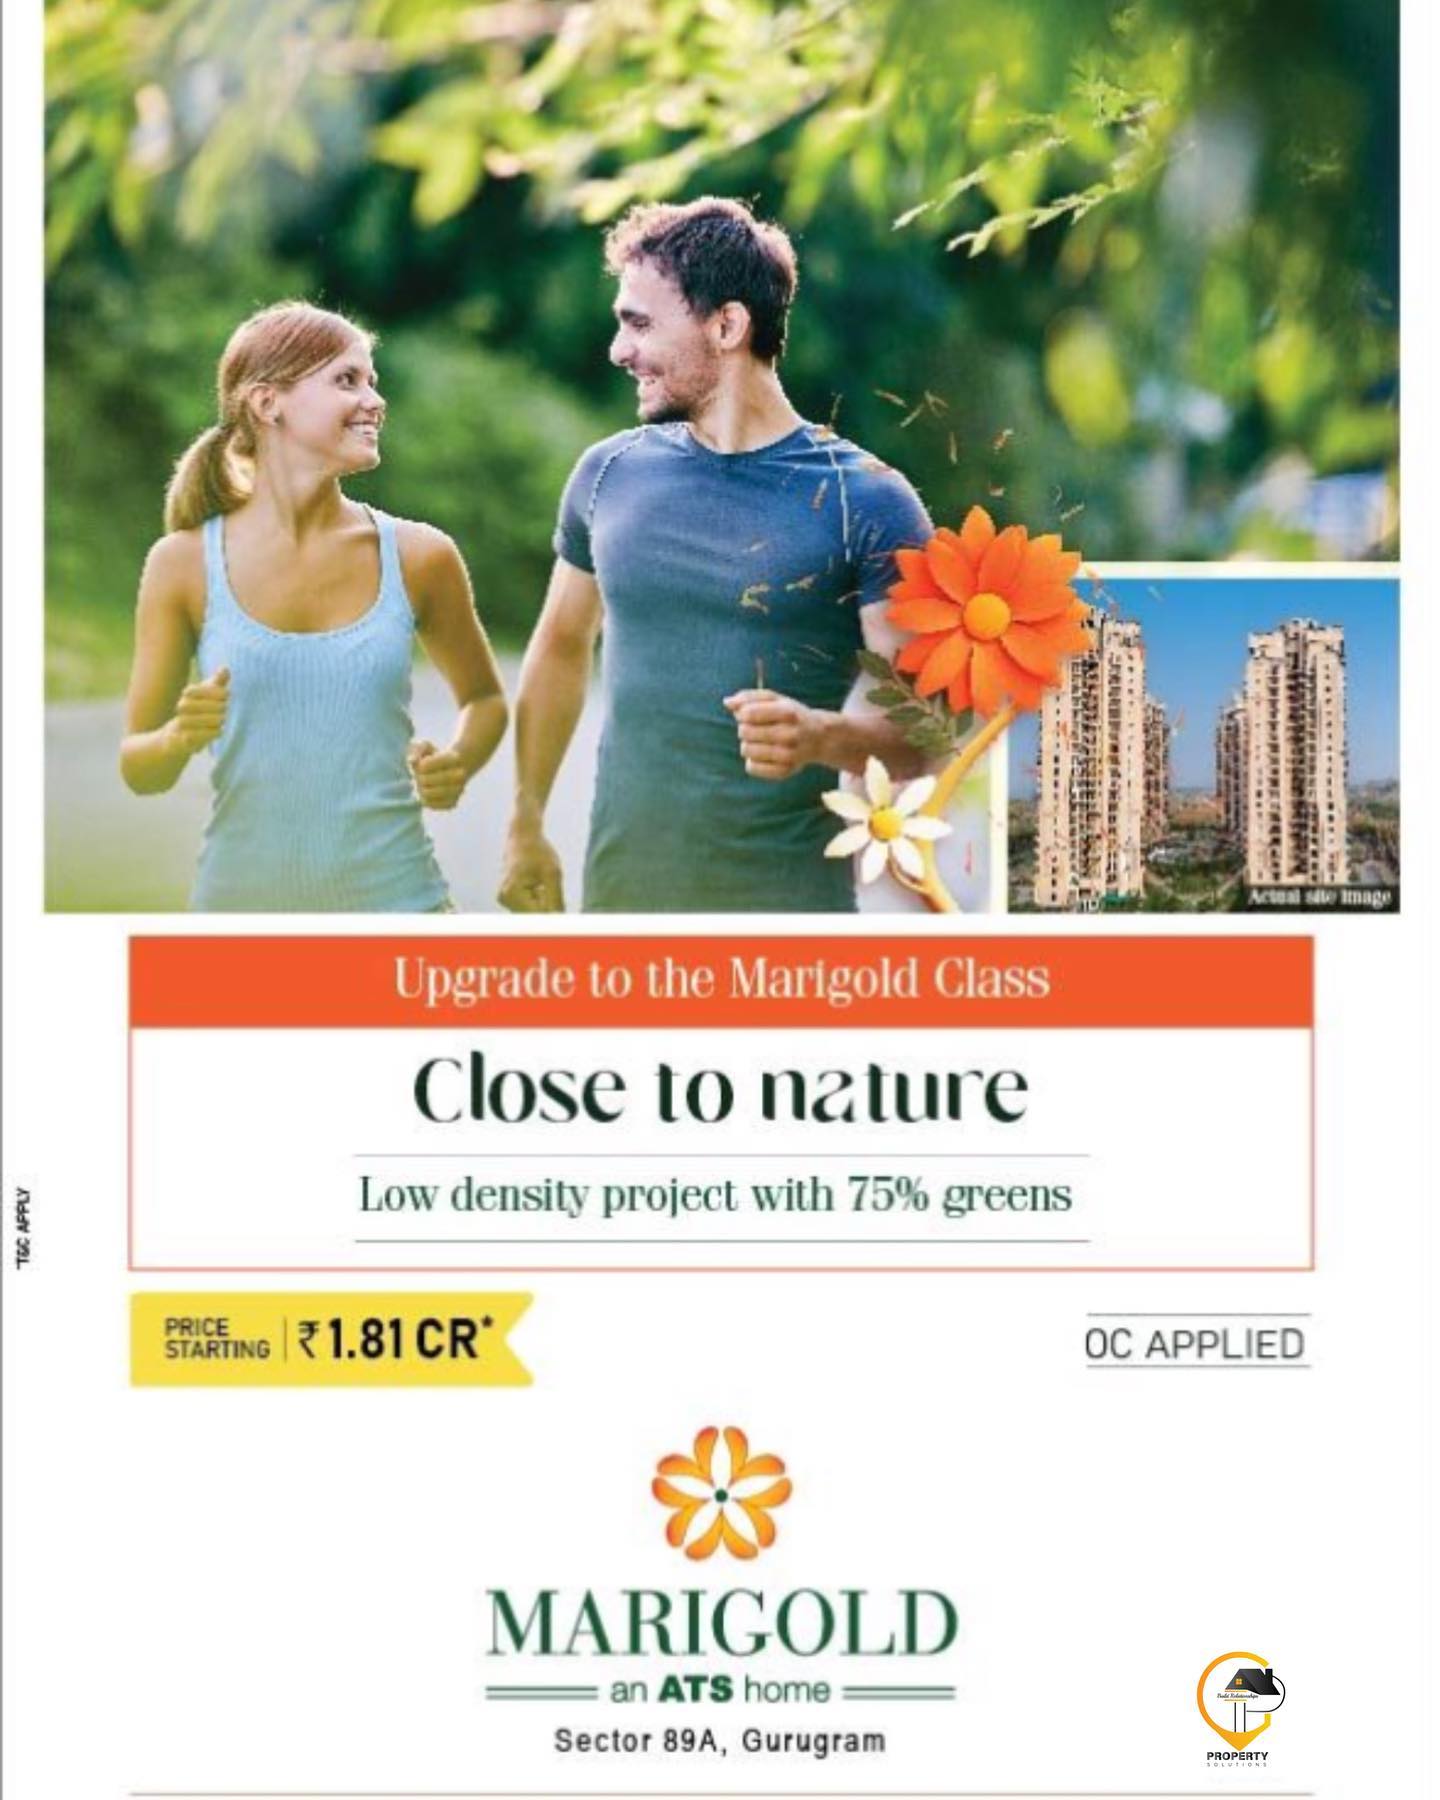 Low density projects with 75% green at ATS Marigold, Gurgaon Update